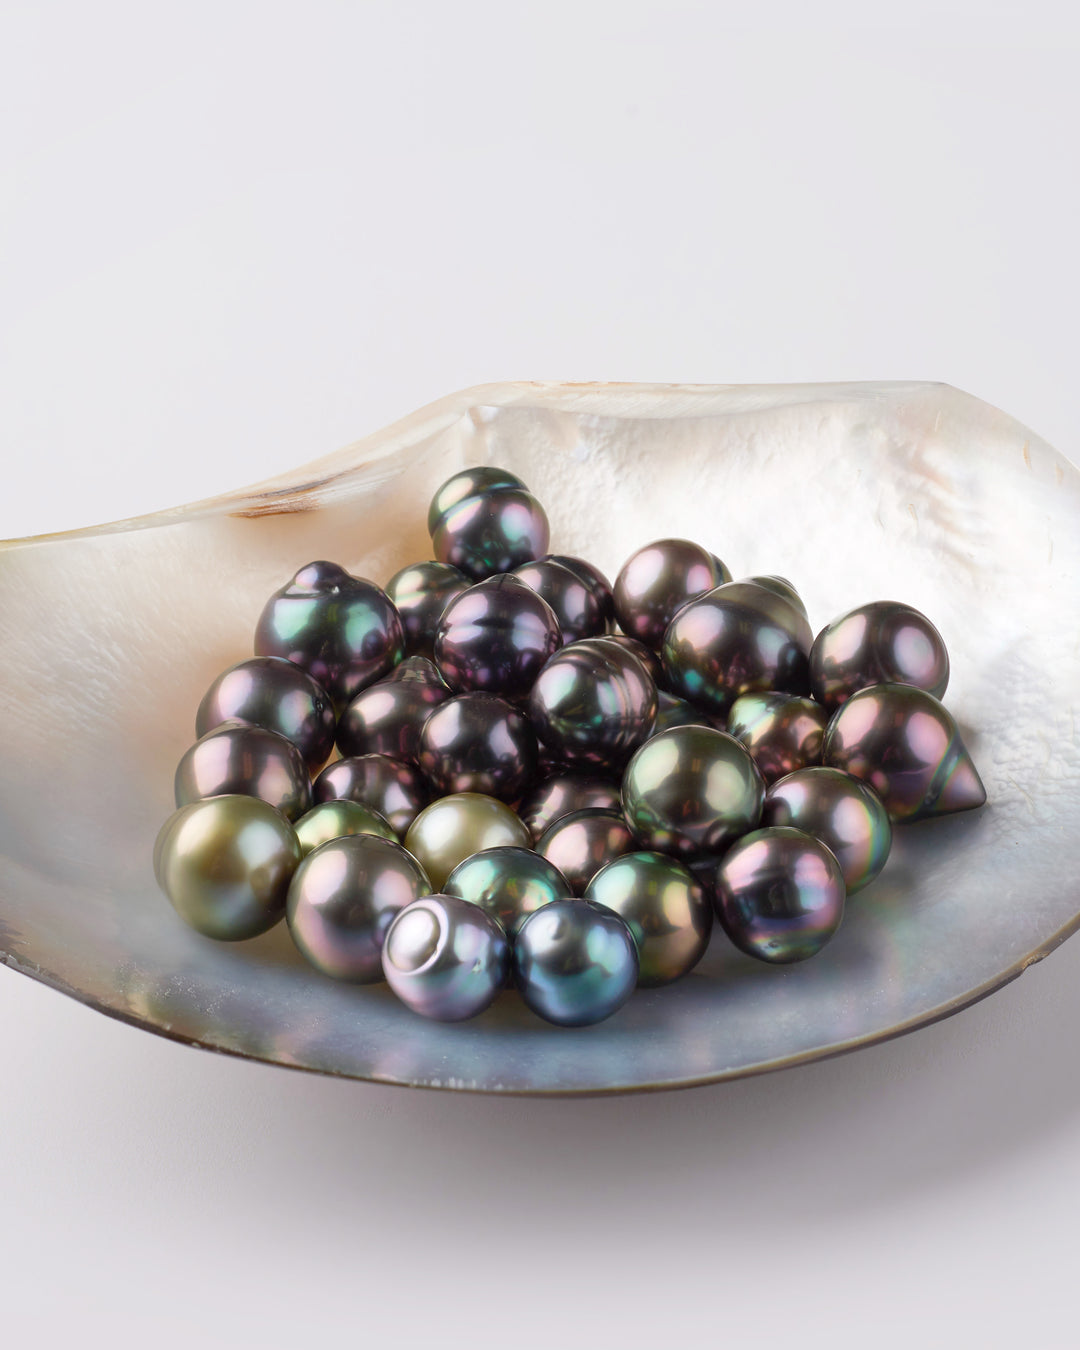 A collecting guide to natural and cultured pearls